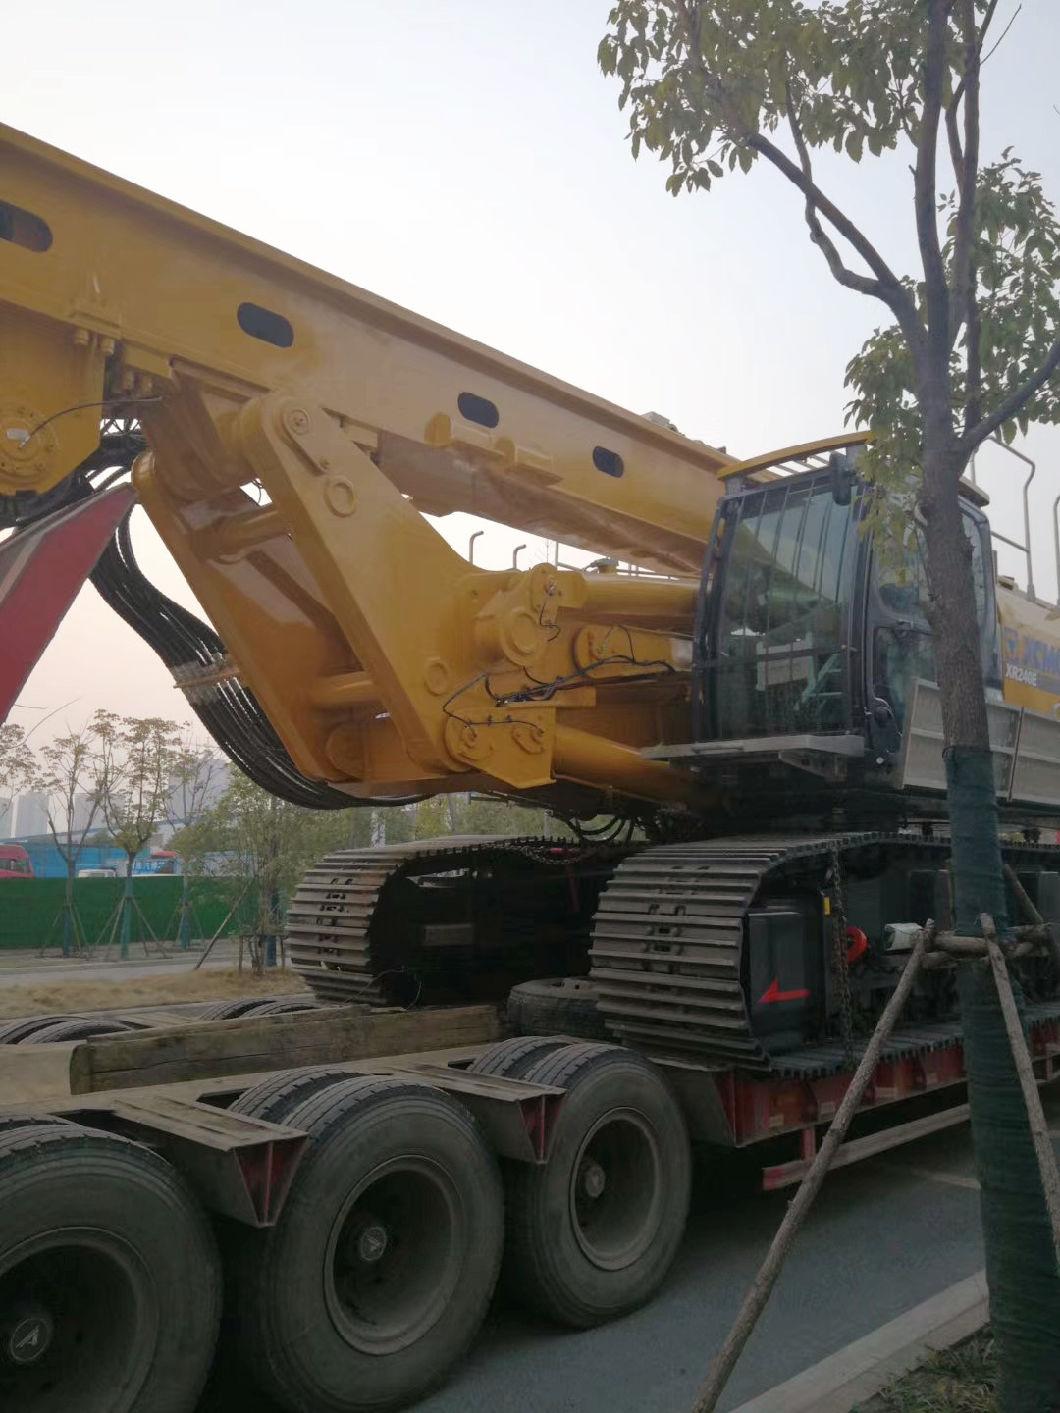 2500mm Xr460 Hydraulic Rotary Water Well Drilling Rig